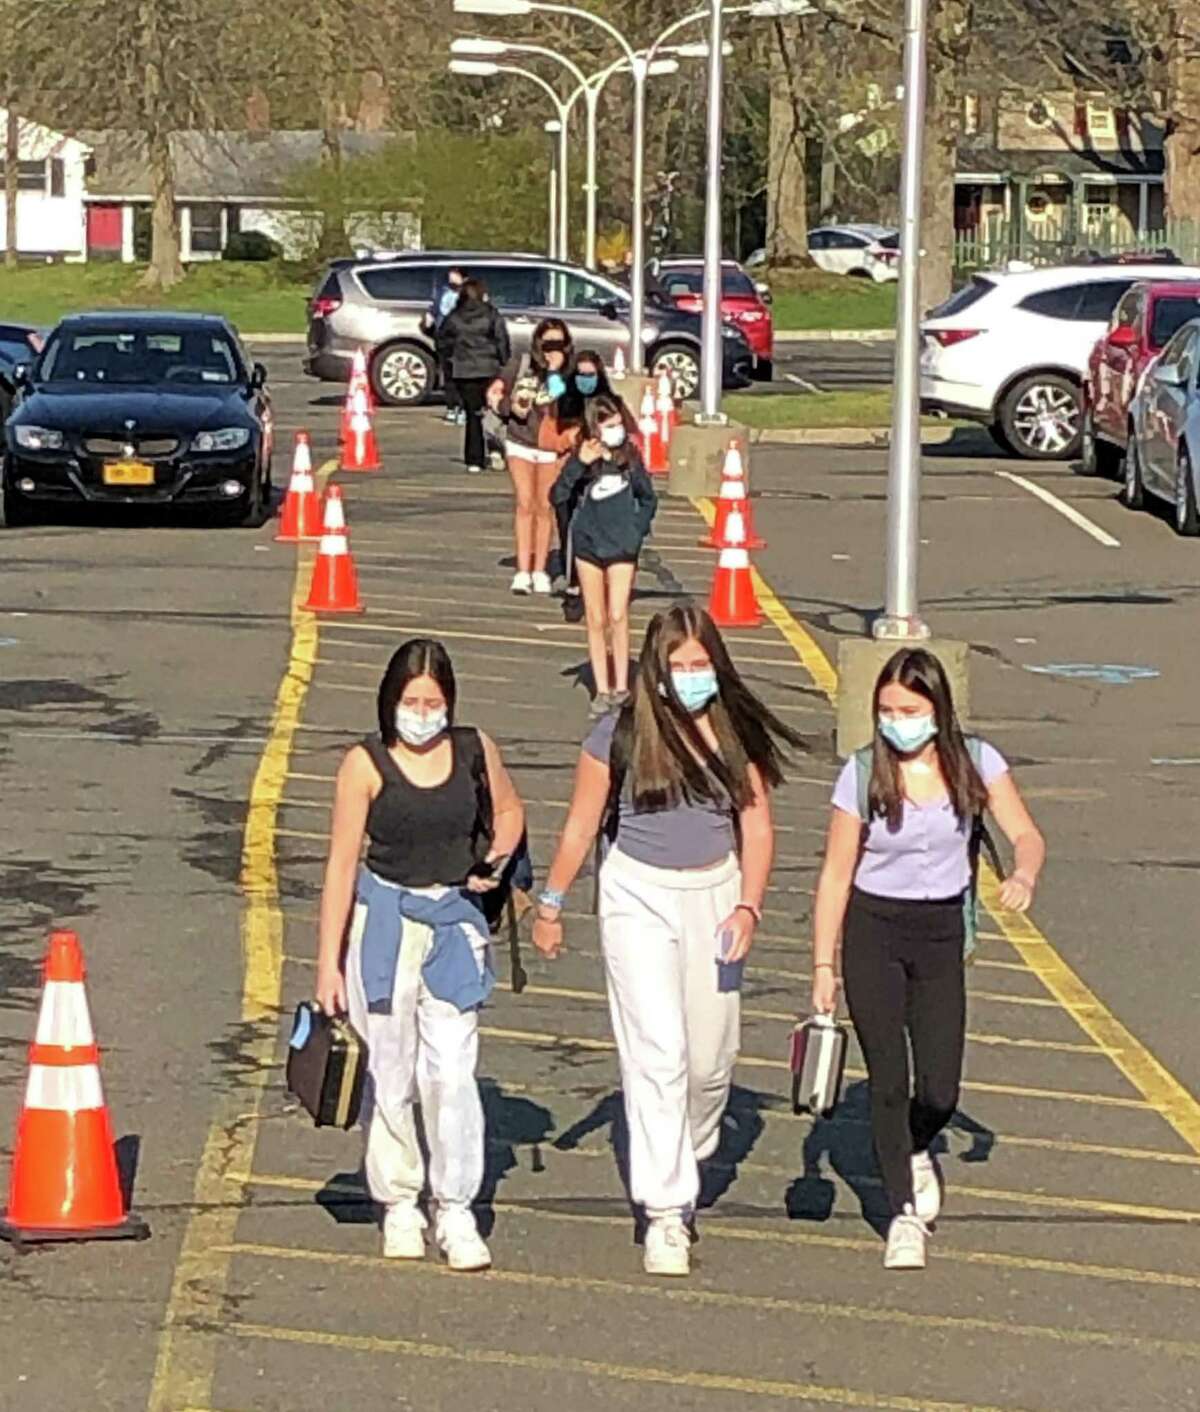 Ridgefield students will have to continue wearing masks while inside school buildings or buses next year, district officials announced Thursday.